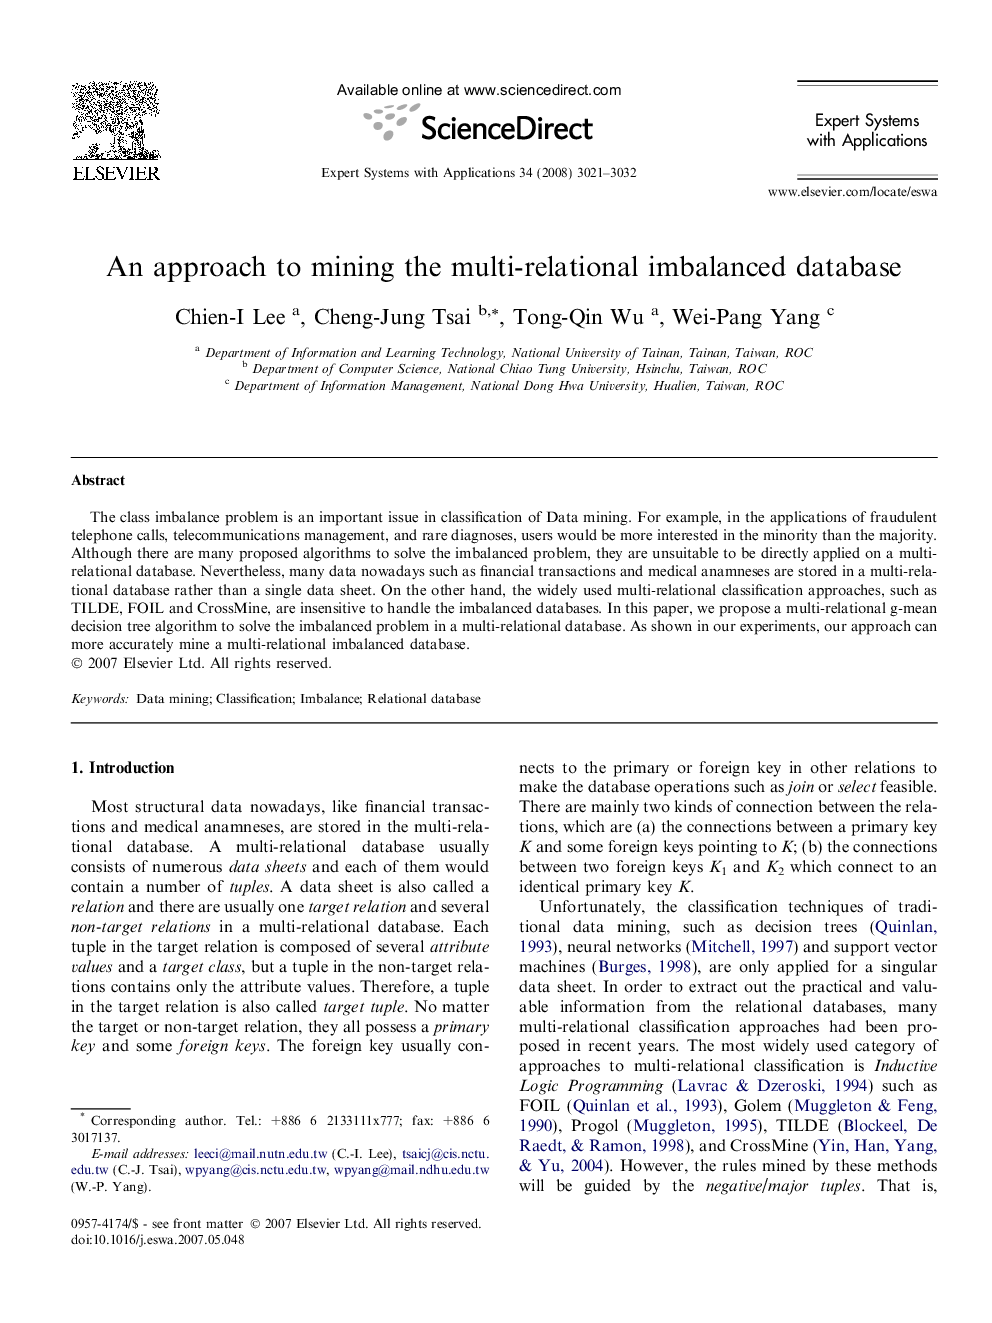 An approach to mining the multi-relational imbalanced database